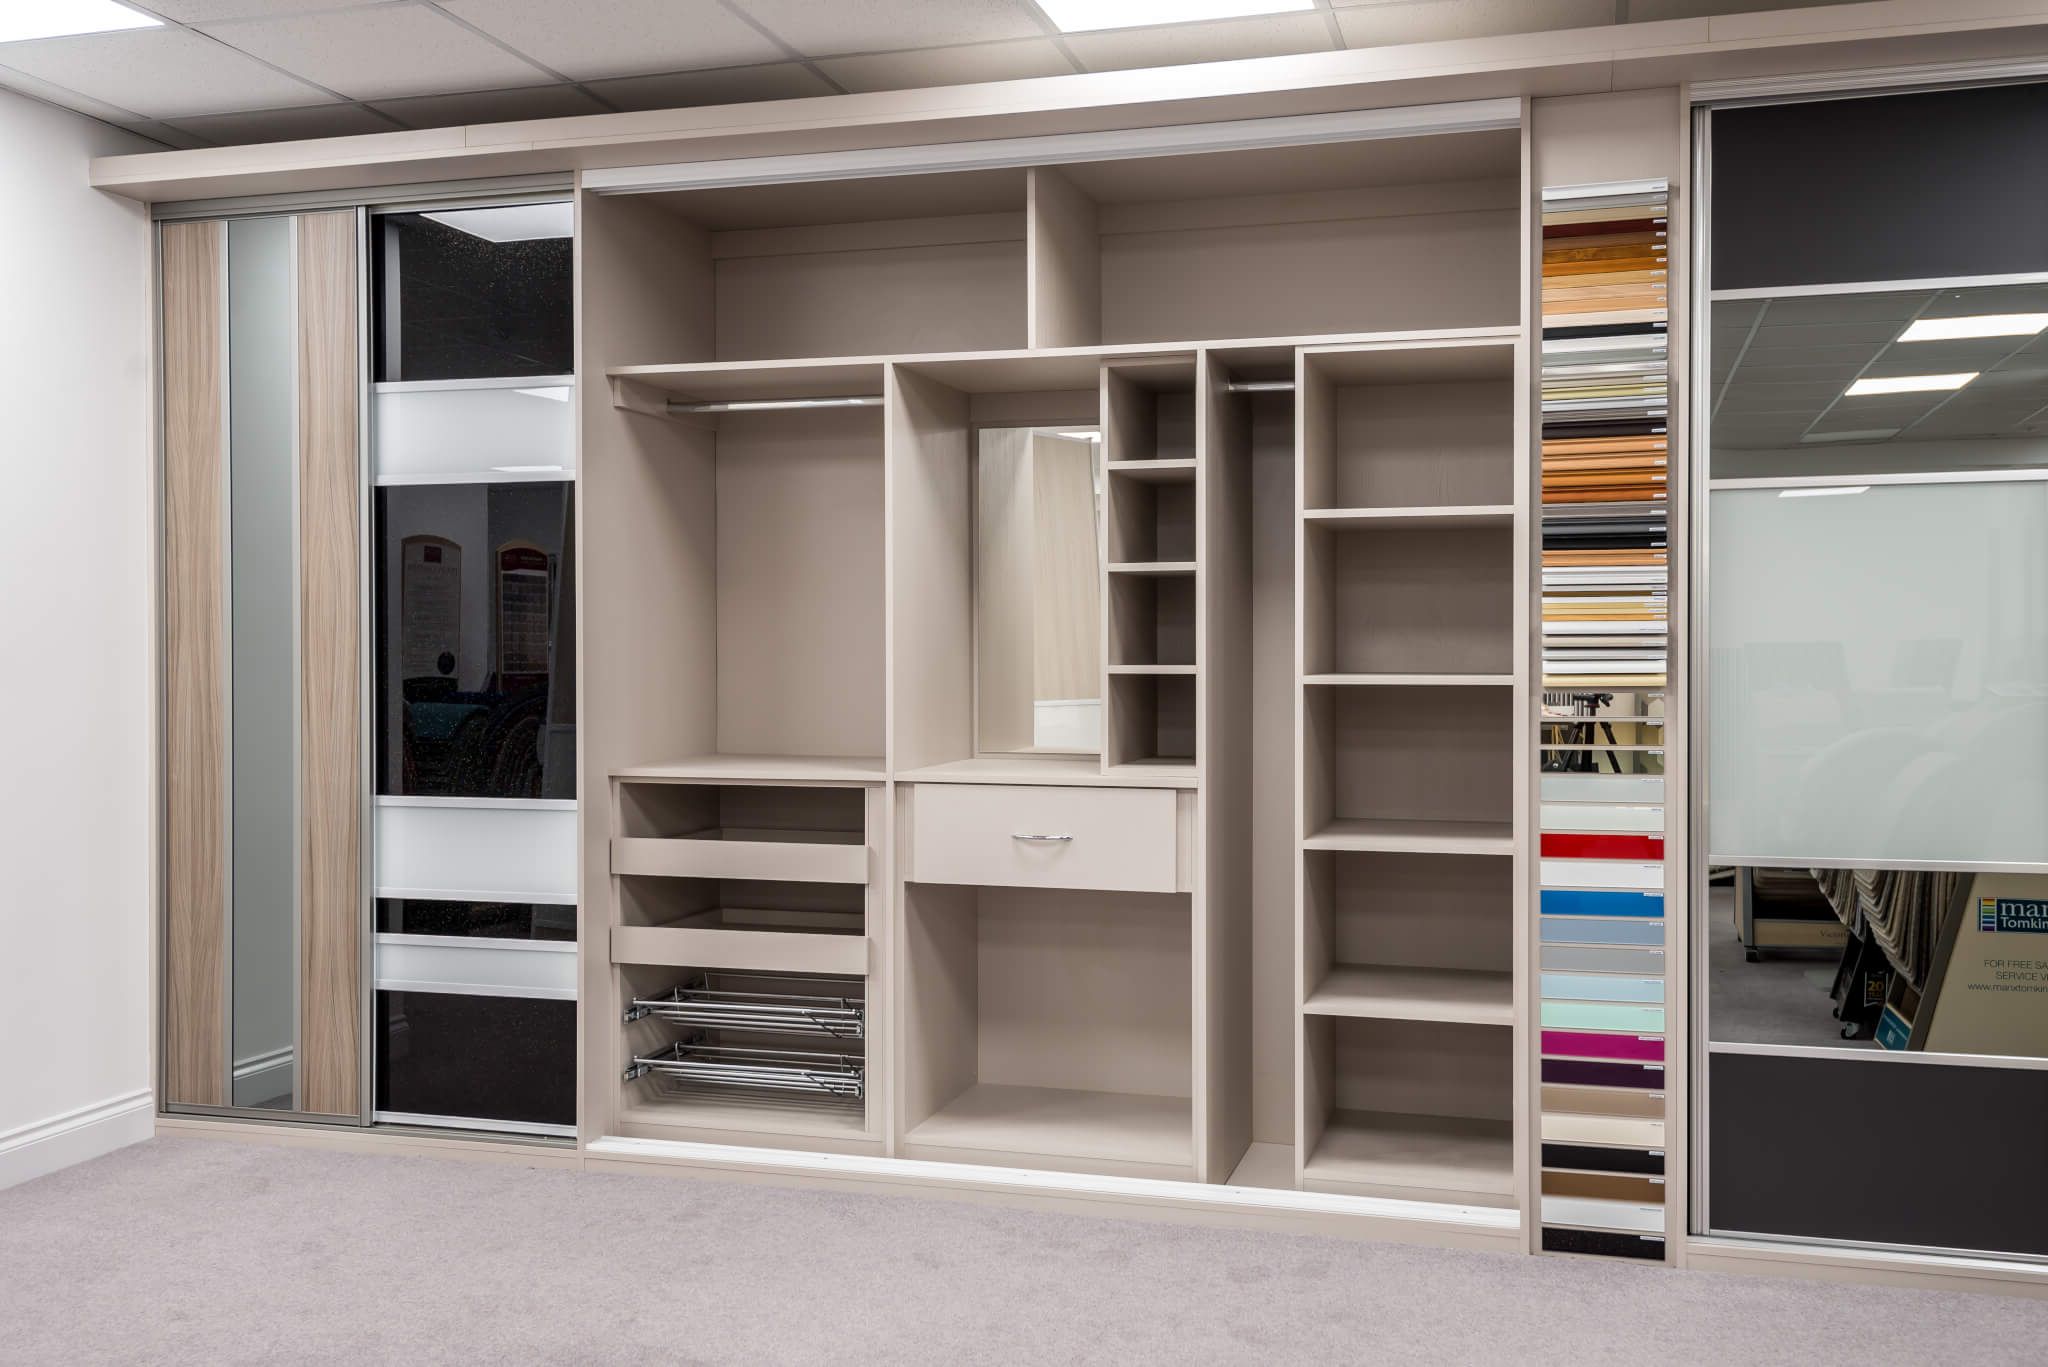 Designing The Perfect Fitted Wardrobe: Shelves Vs Drawers Vs Hanging Space  (which Is Best)? | Millers Regarding Single Wardrobes With Drawers And Shelves (Gallery 13 of 20)